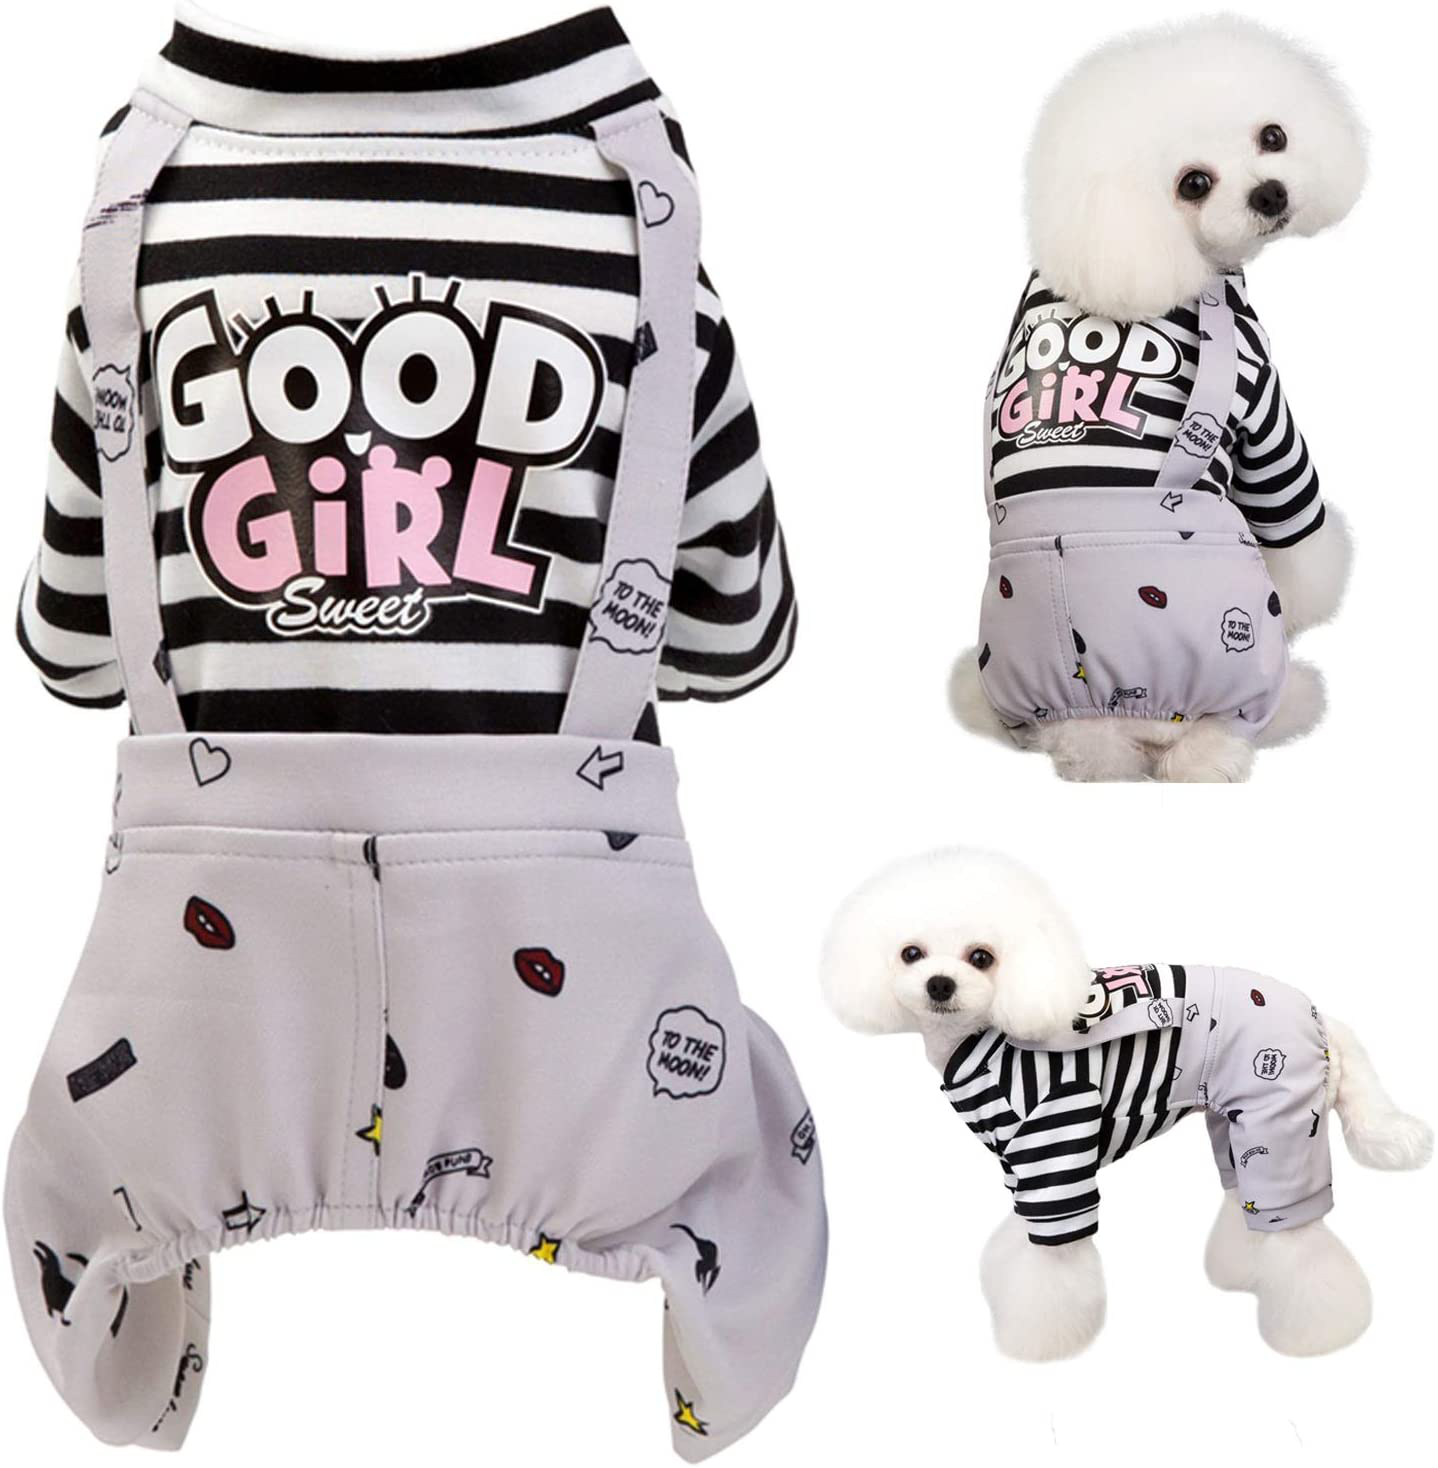 Brocarp Dog Clothes Striped Onesie Puppy Shirt, Cute Dog Pajamas Bodysuit Coat Jumpsuit Overalls Soft Comfort Pjs Apparel Costume, Dog Outfit for Small Medium Large Dogs Cats Kitten Boy Girl Animals & Pet Supplies > Pet Supplies > Cat Supplies > Cat Apparel Brocarp Grey Large 